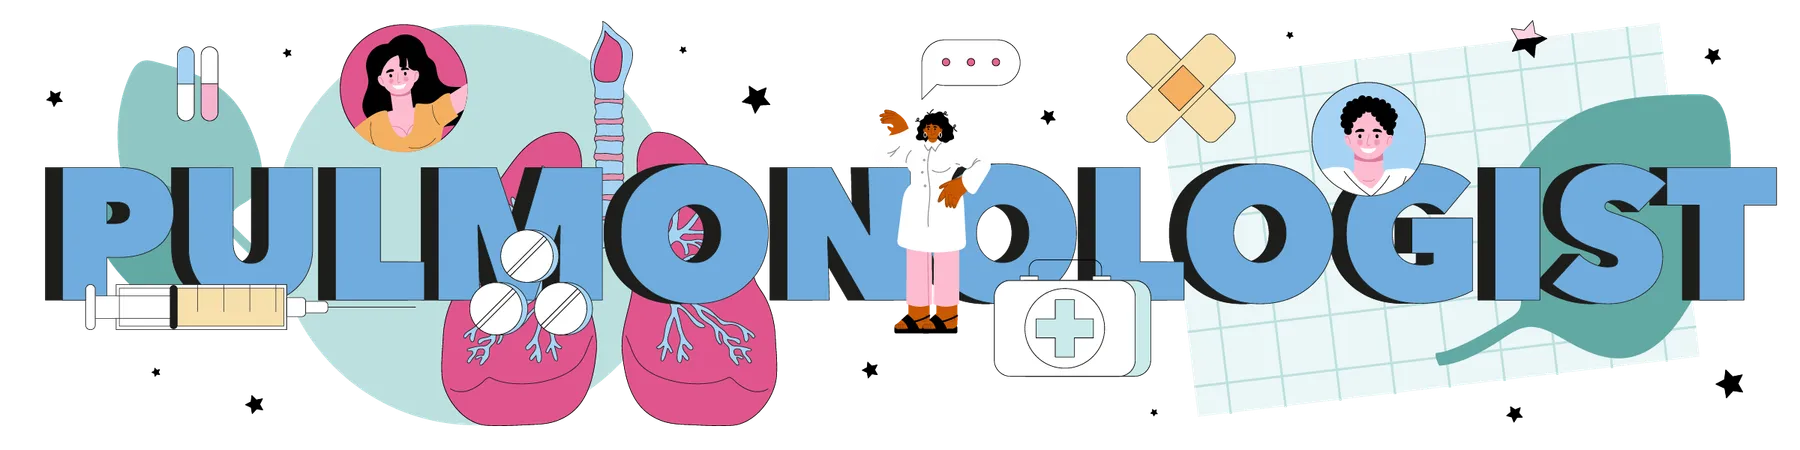 Pulmonologist Typographic Header Pulmonary System Examination Diagnosis And Medical Treatment Lungs Diseases Prevention Flat Vector Illustration イラスト